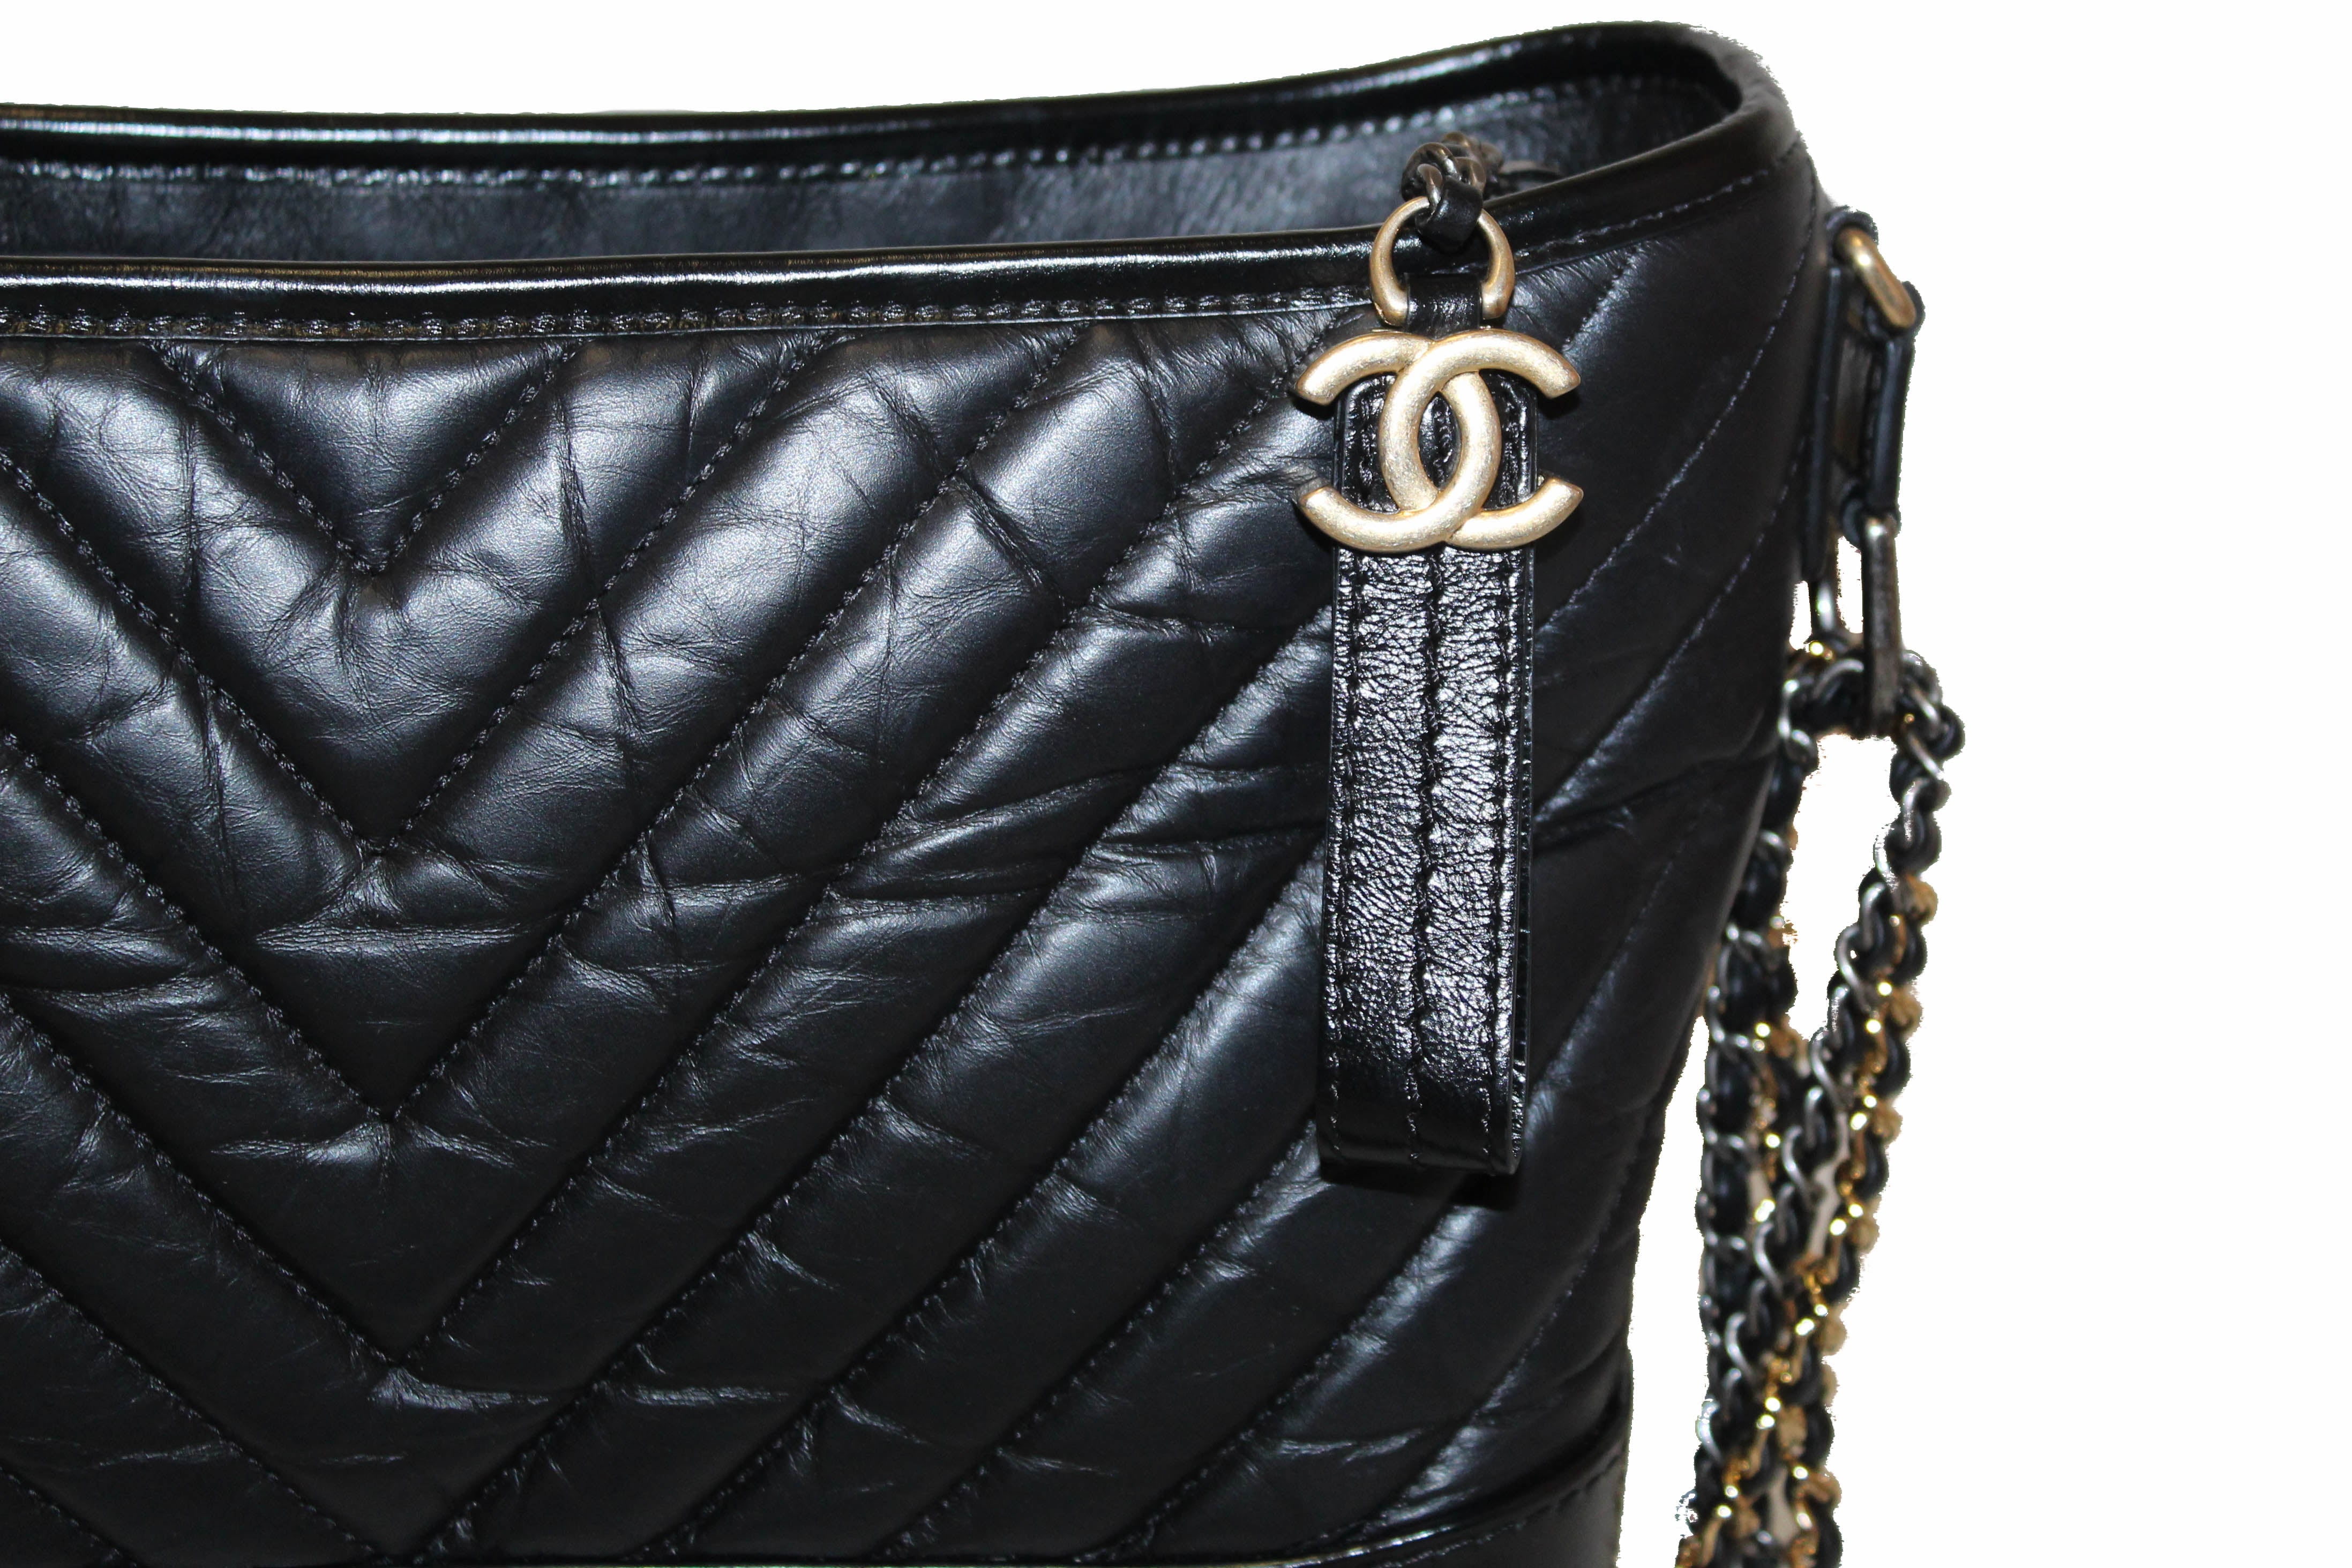 Chanel Black Chevron Quilted Aged Calfskin Small Gabrielle Hobo